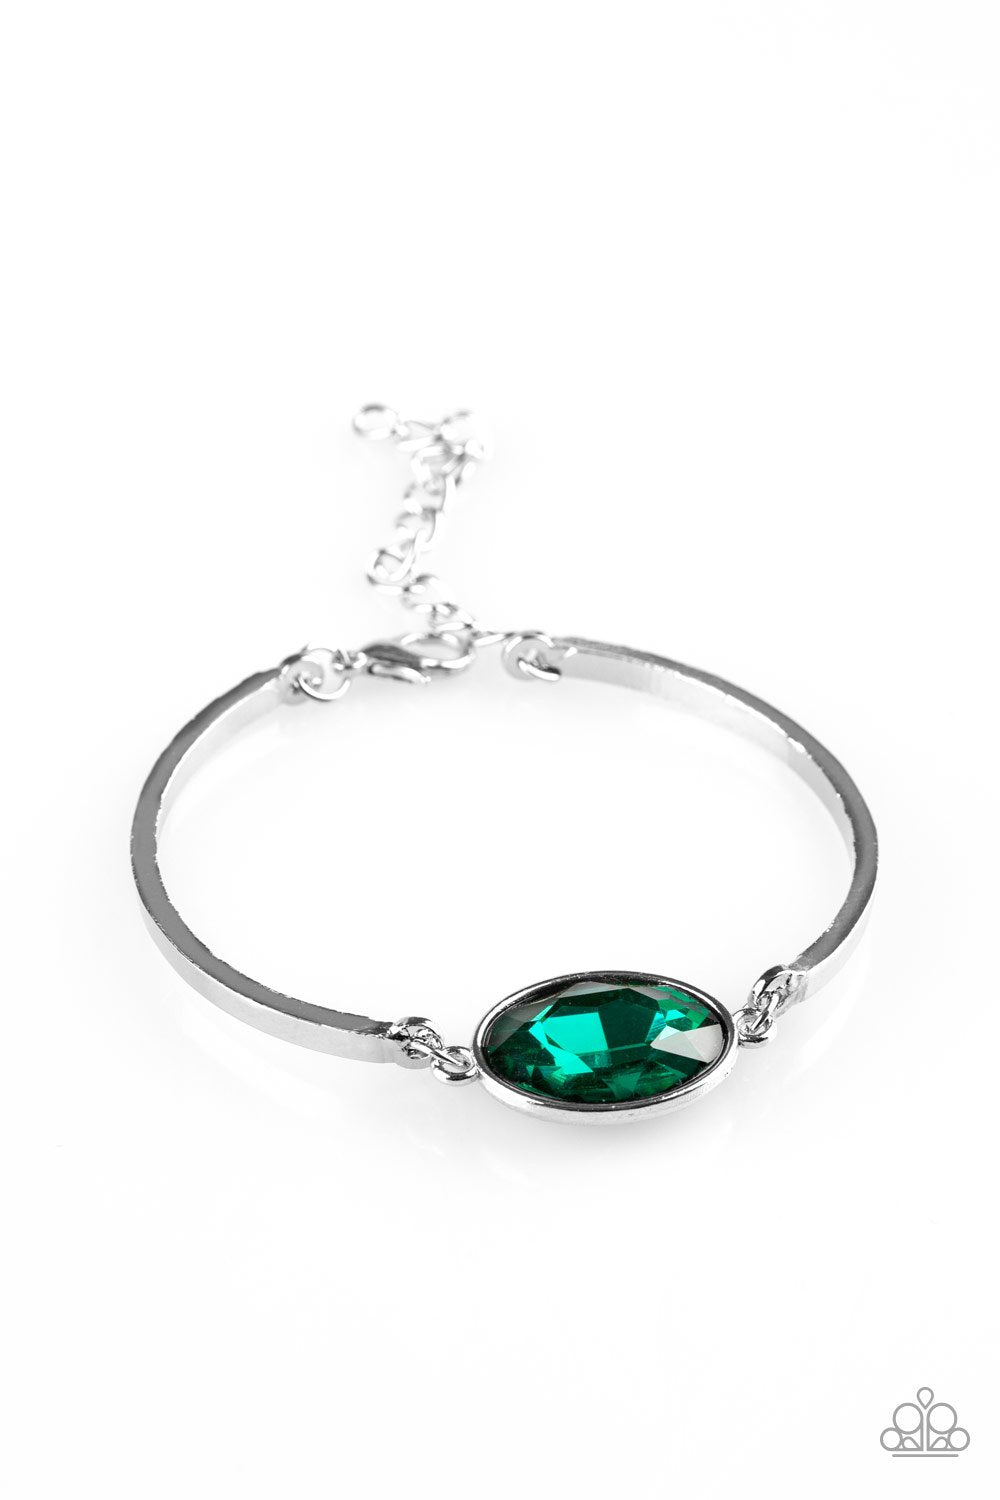 Definitely Dashing Silver and Emerald Green Gem Bracelet - Paparazzi Accessories-CarasShop.com - $5 Jewelry by Cara Jewels